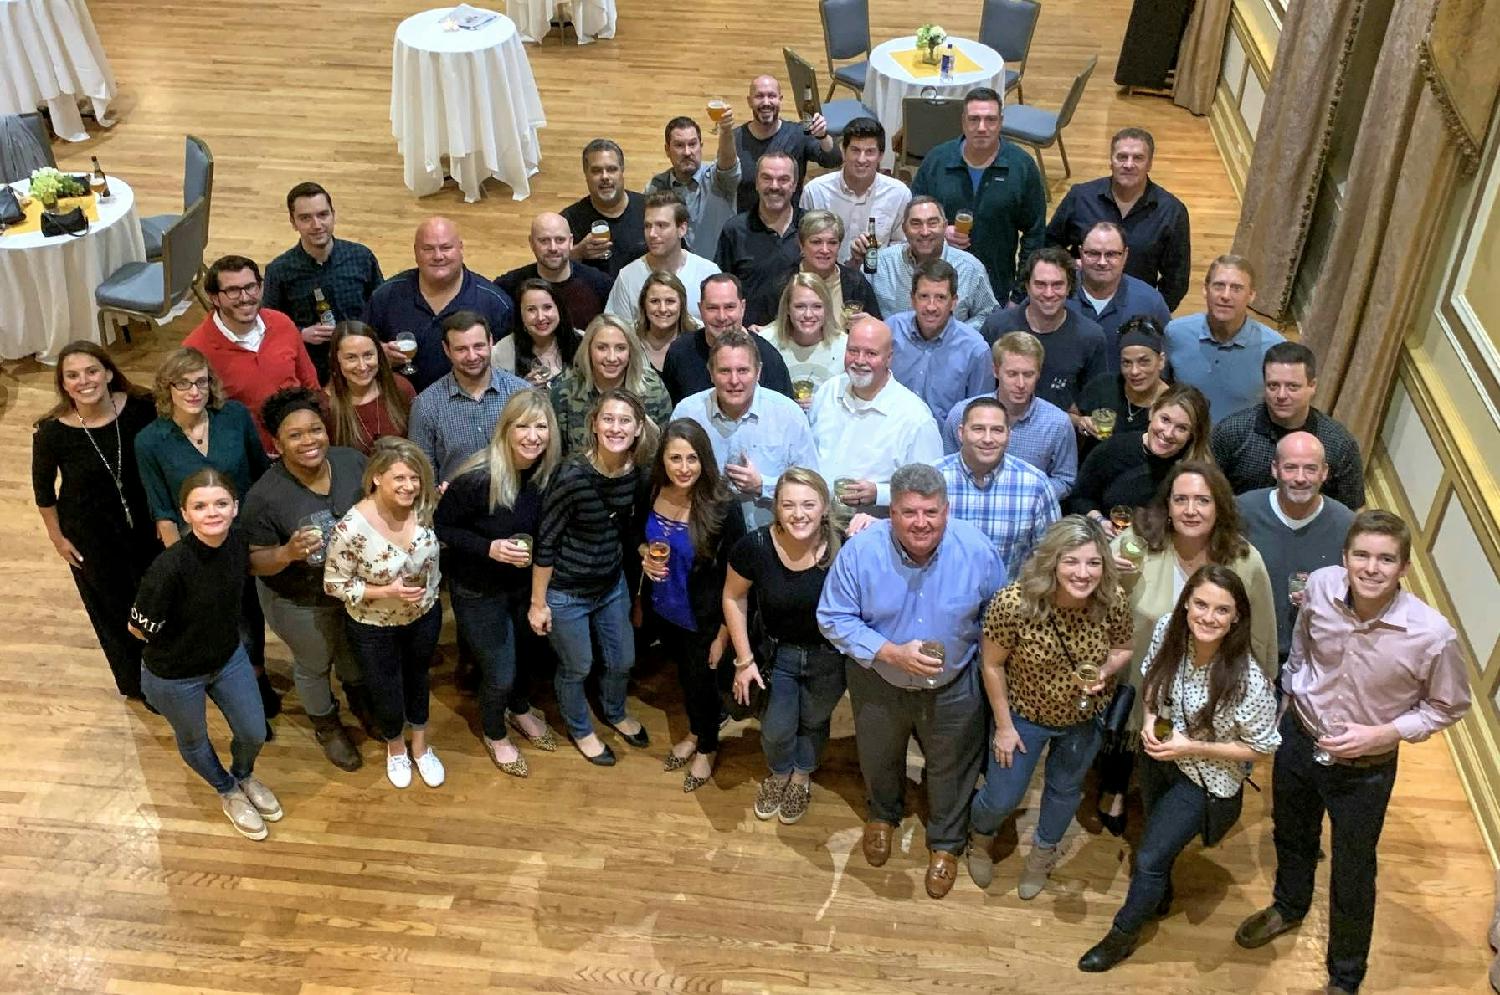 TBS company sales meeting in January 2020. We can't wait to be together safely in one place again very soon!